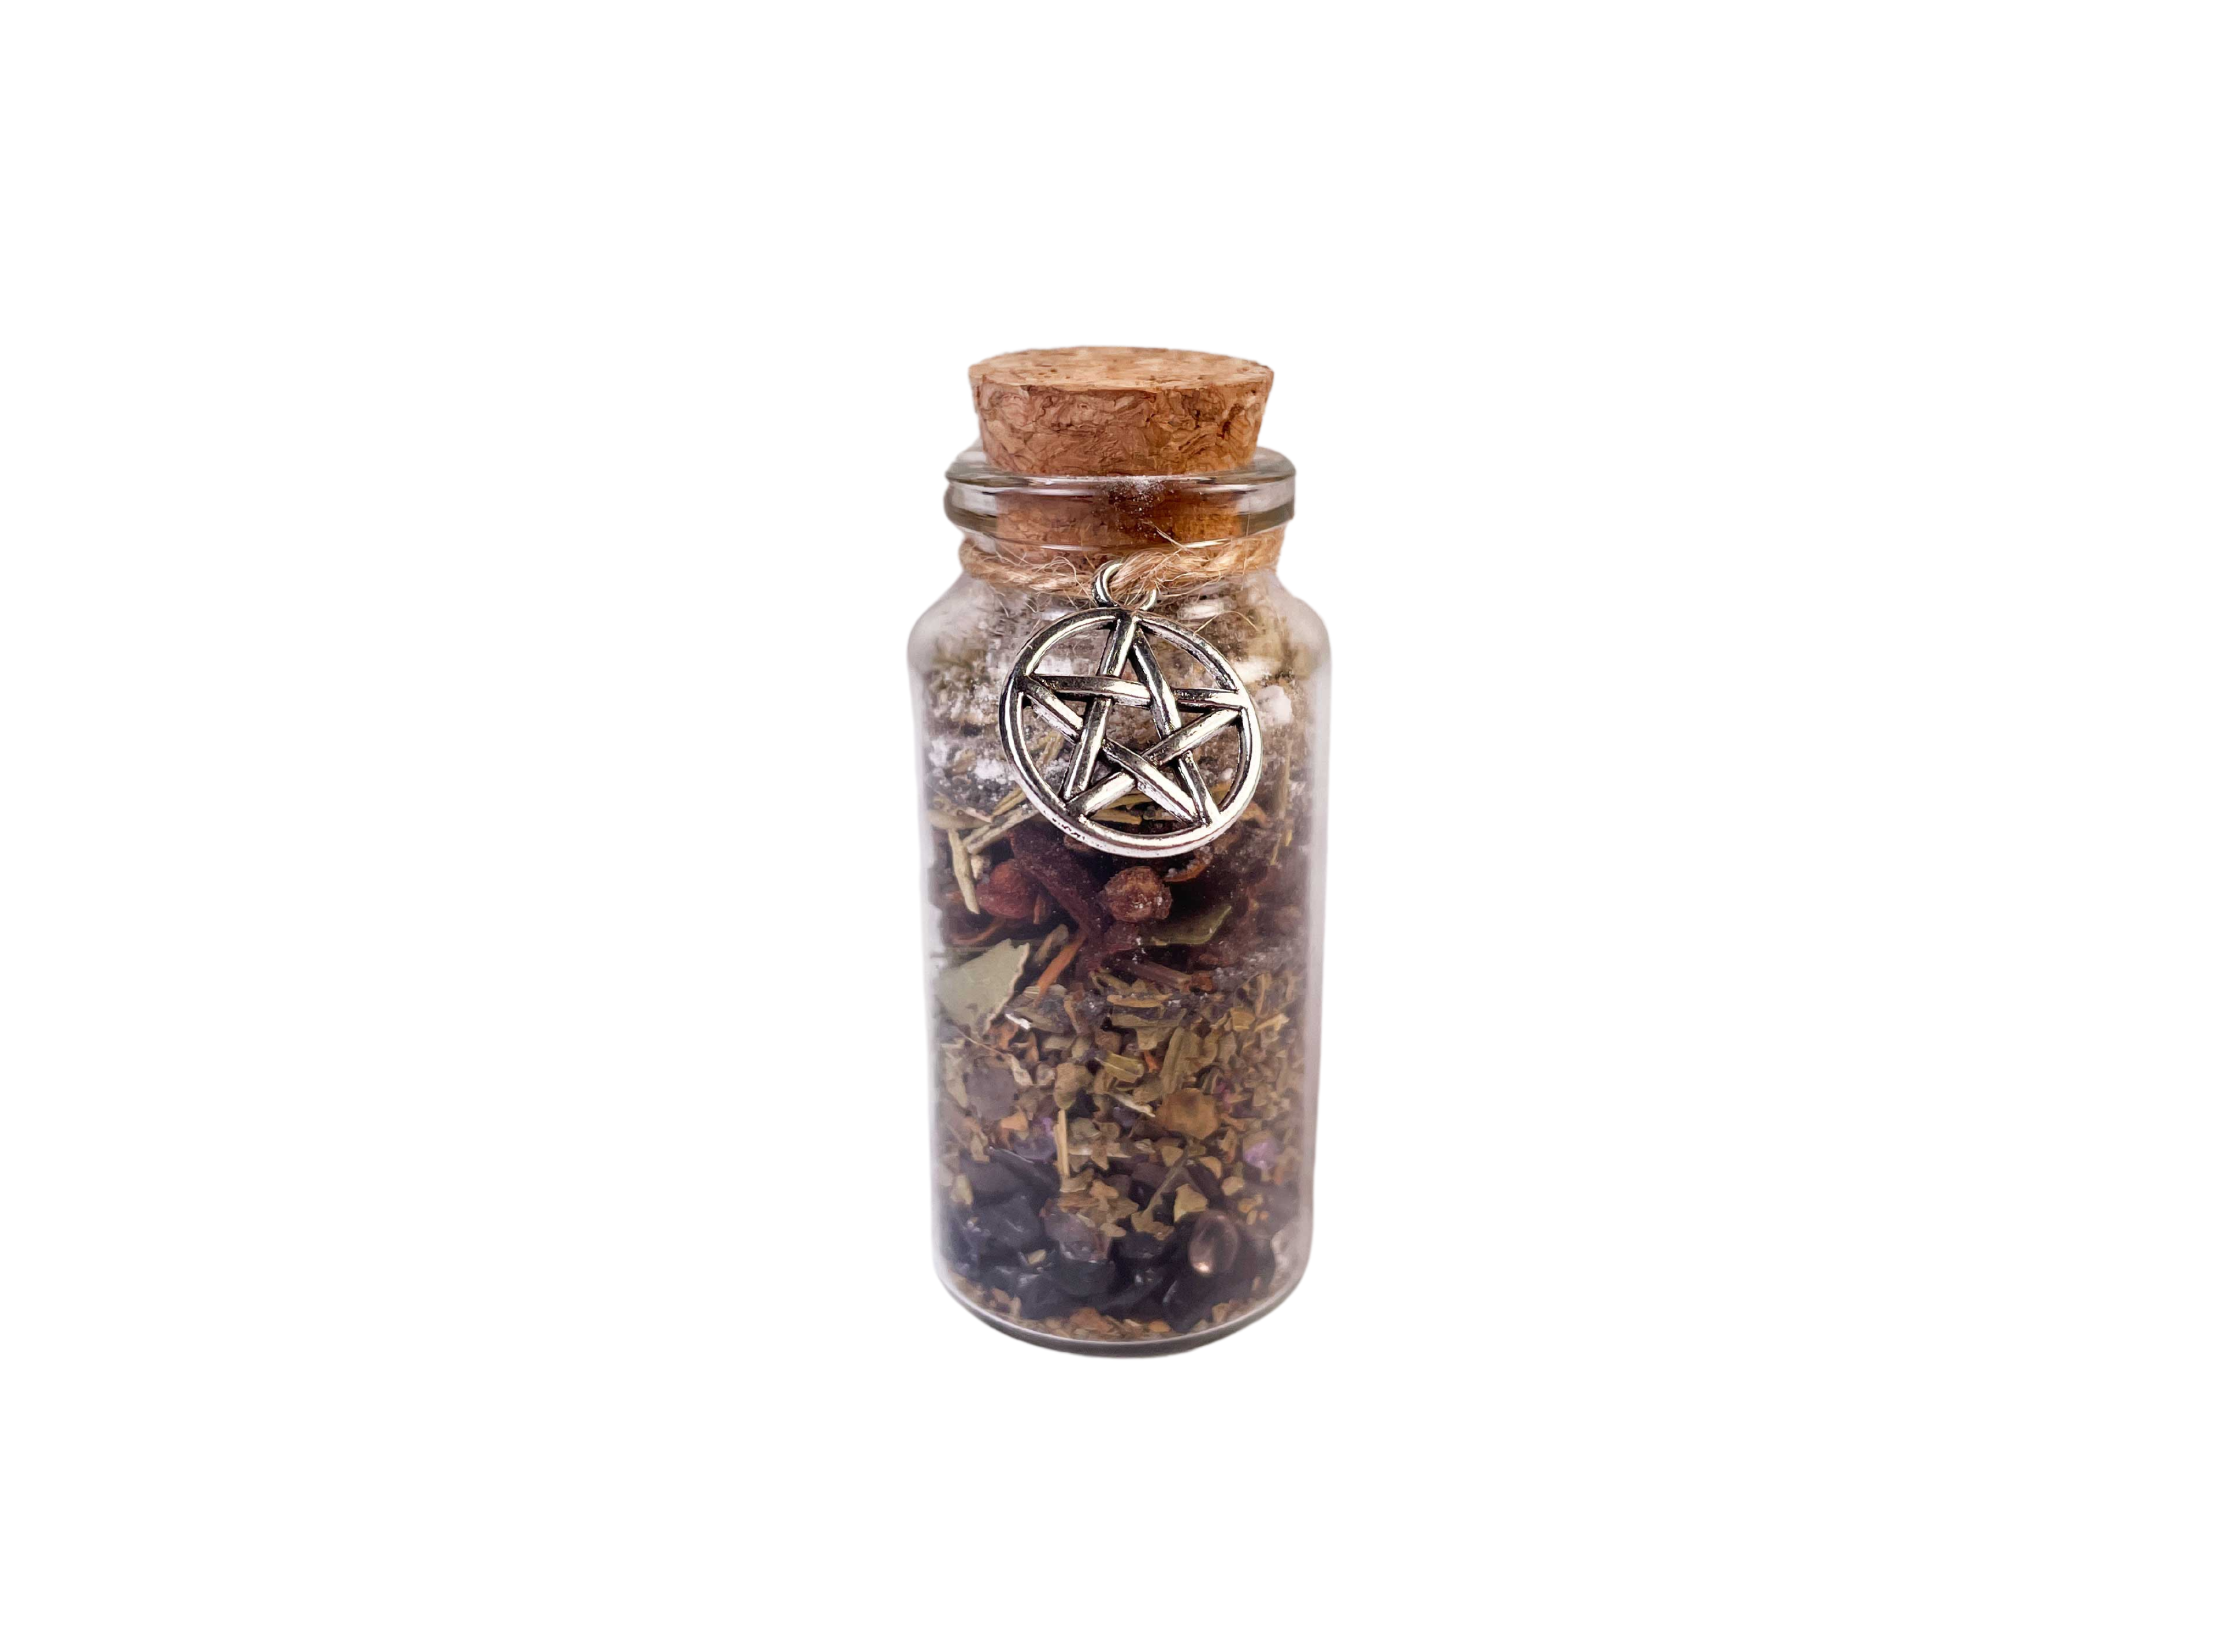 Buy Online Latest and Unique Grounding, Protection, Purification Ritual Jar | Shop Best Spiritual Items - The Mystical Ritual